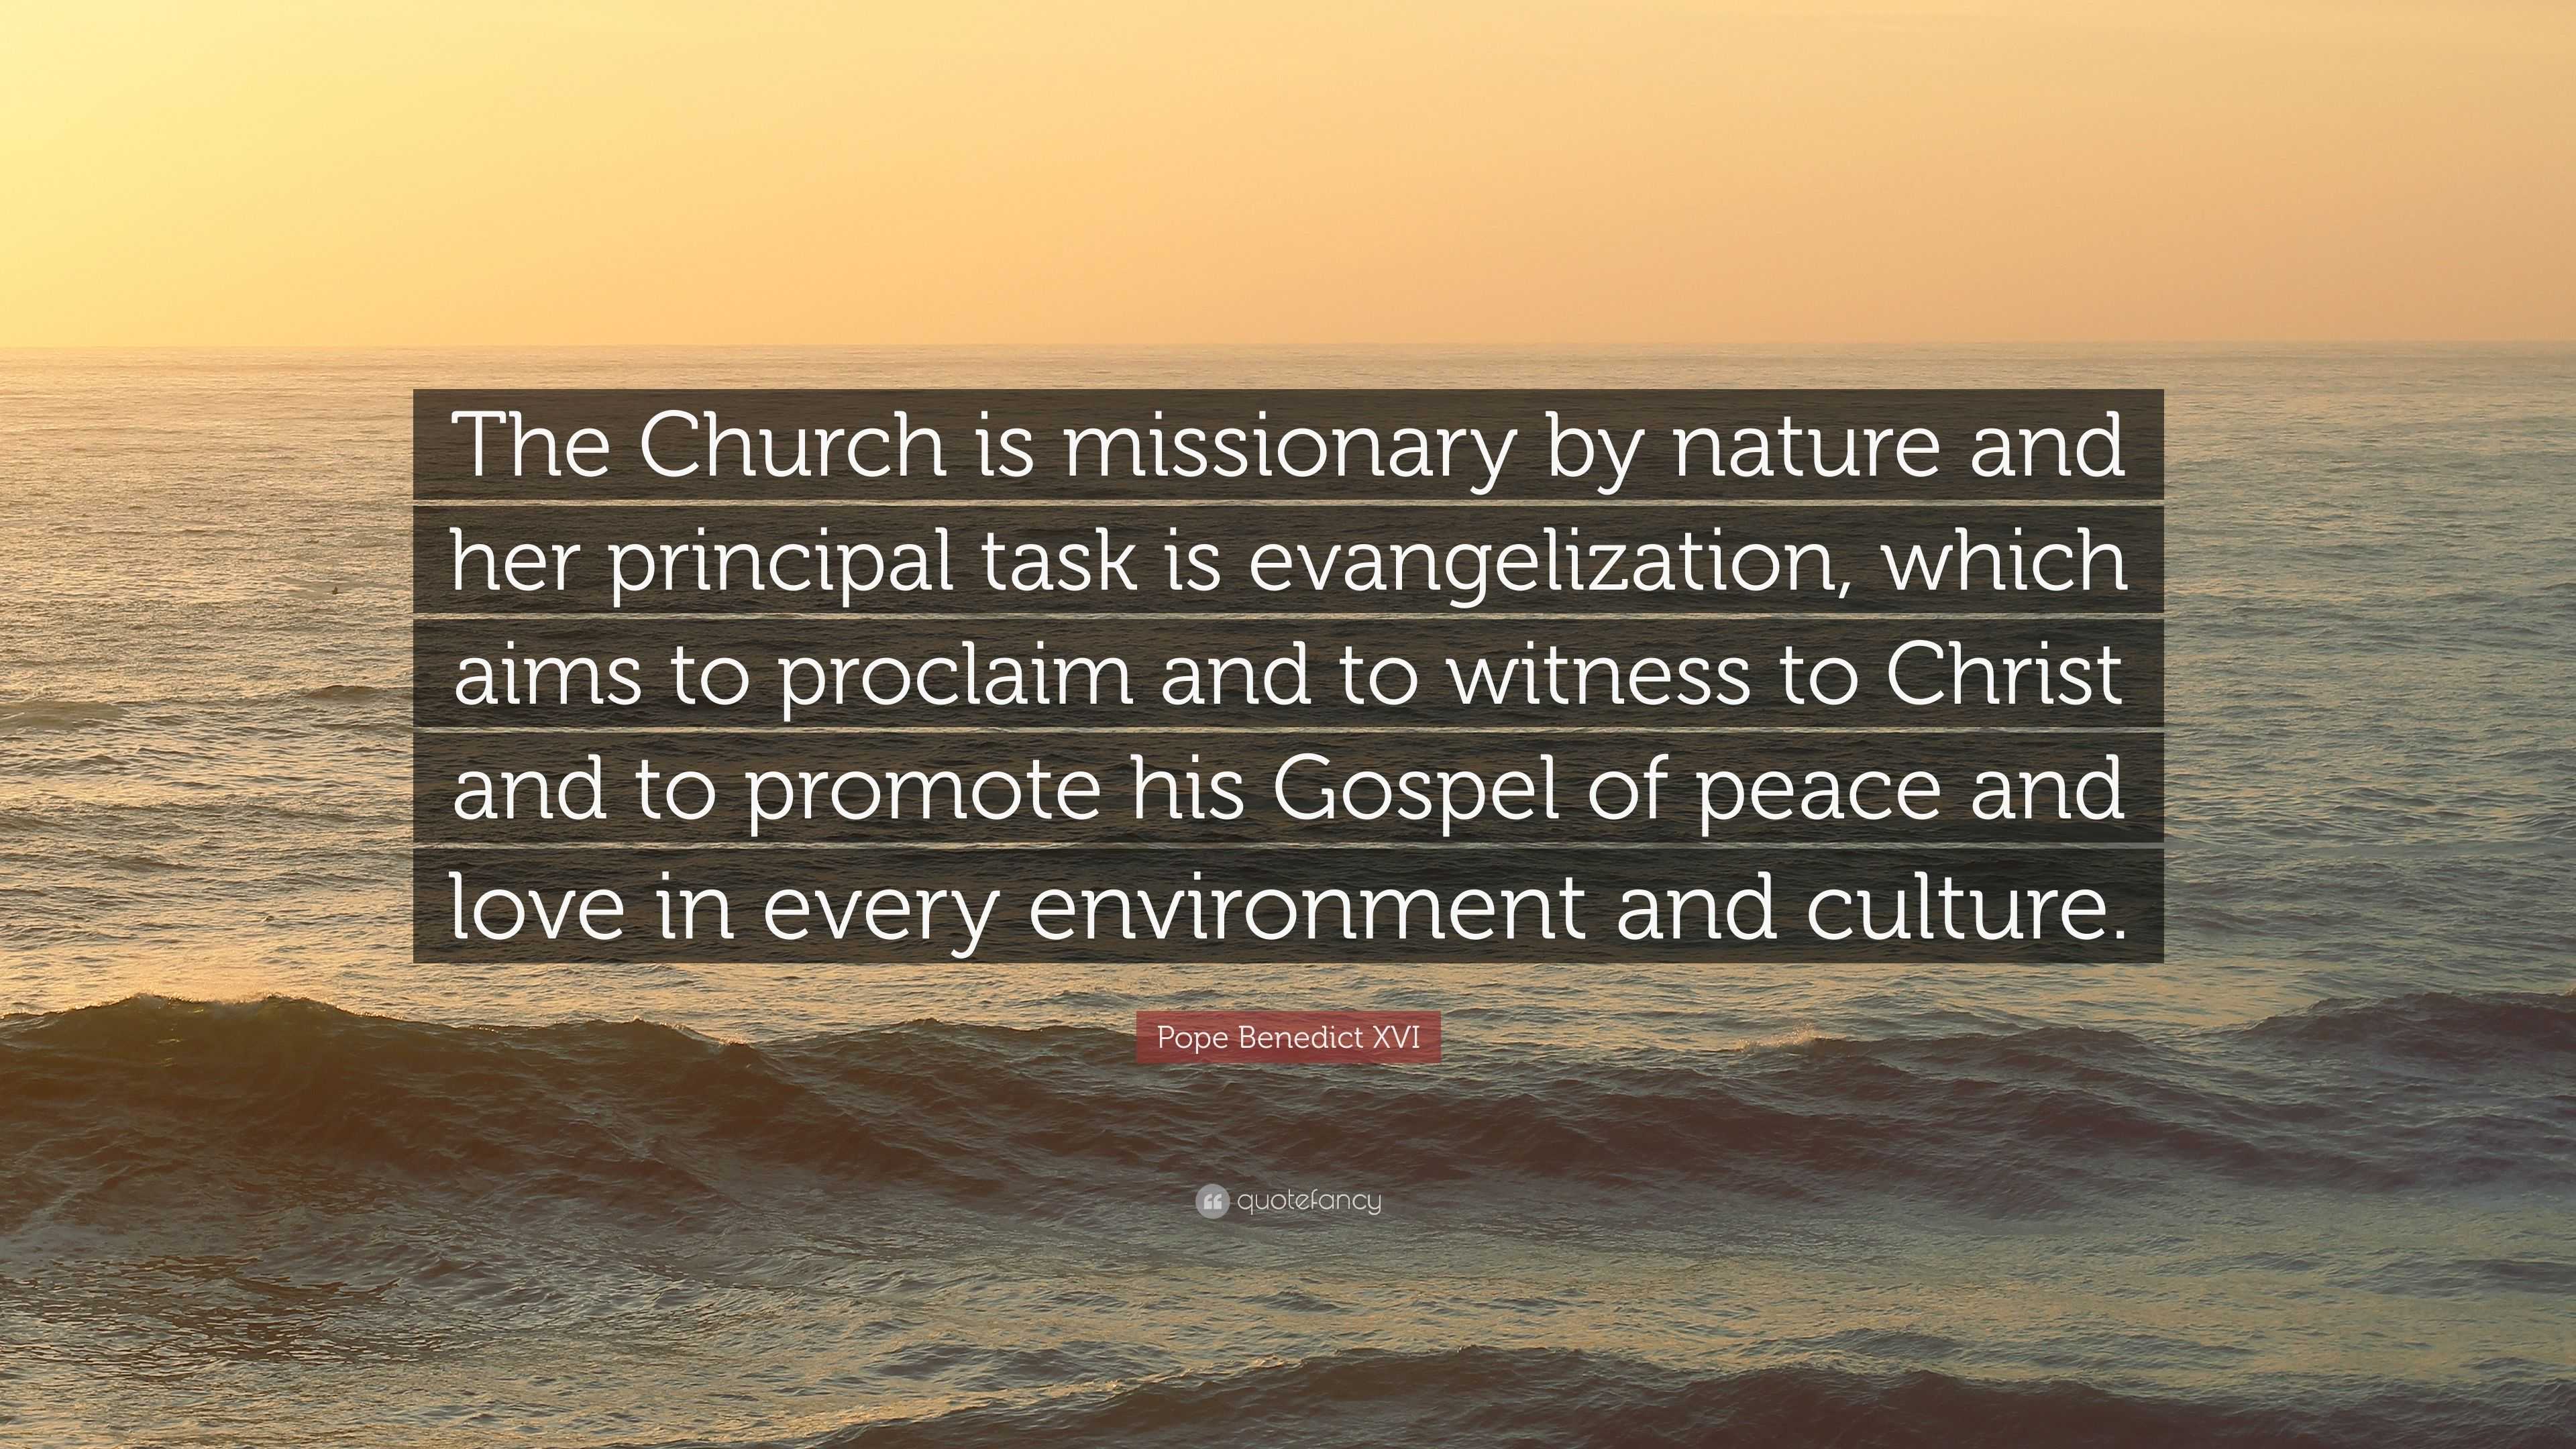 Pope Benedict XVI Quote “The Church is missionary by